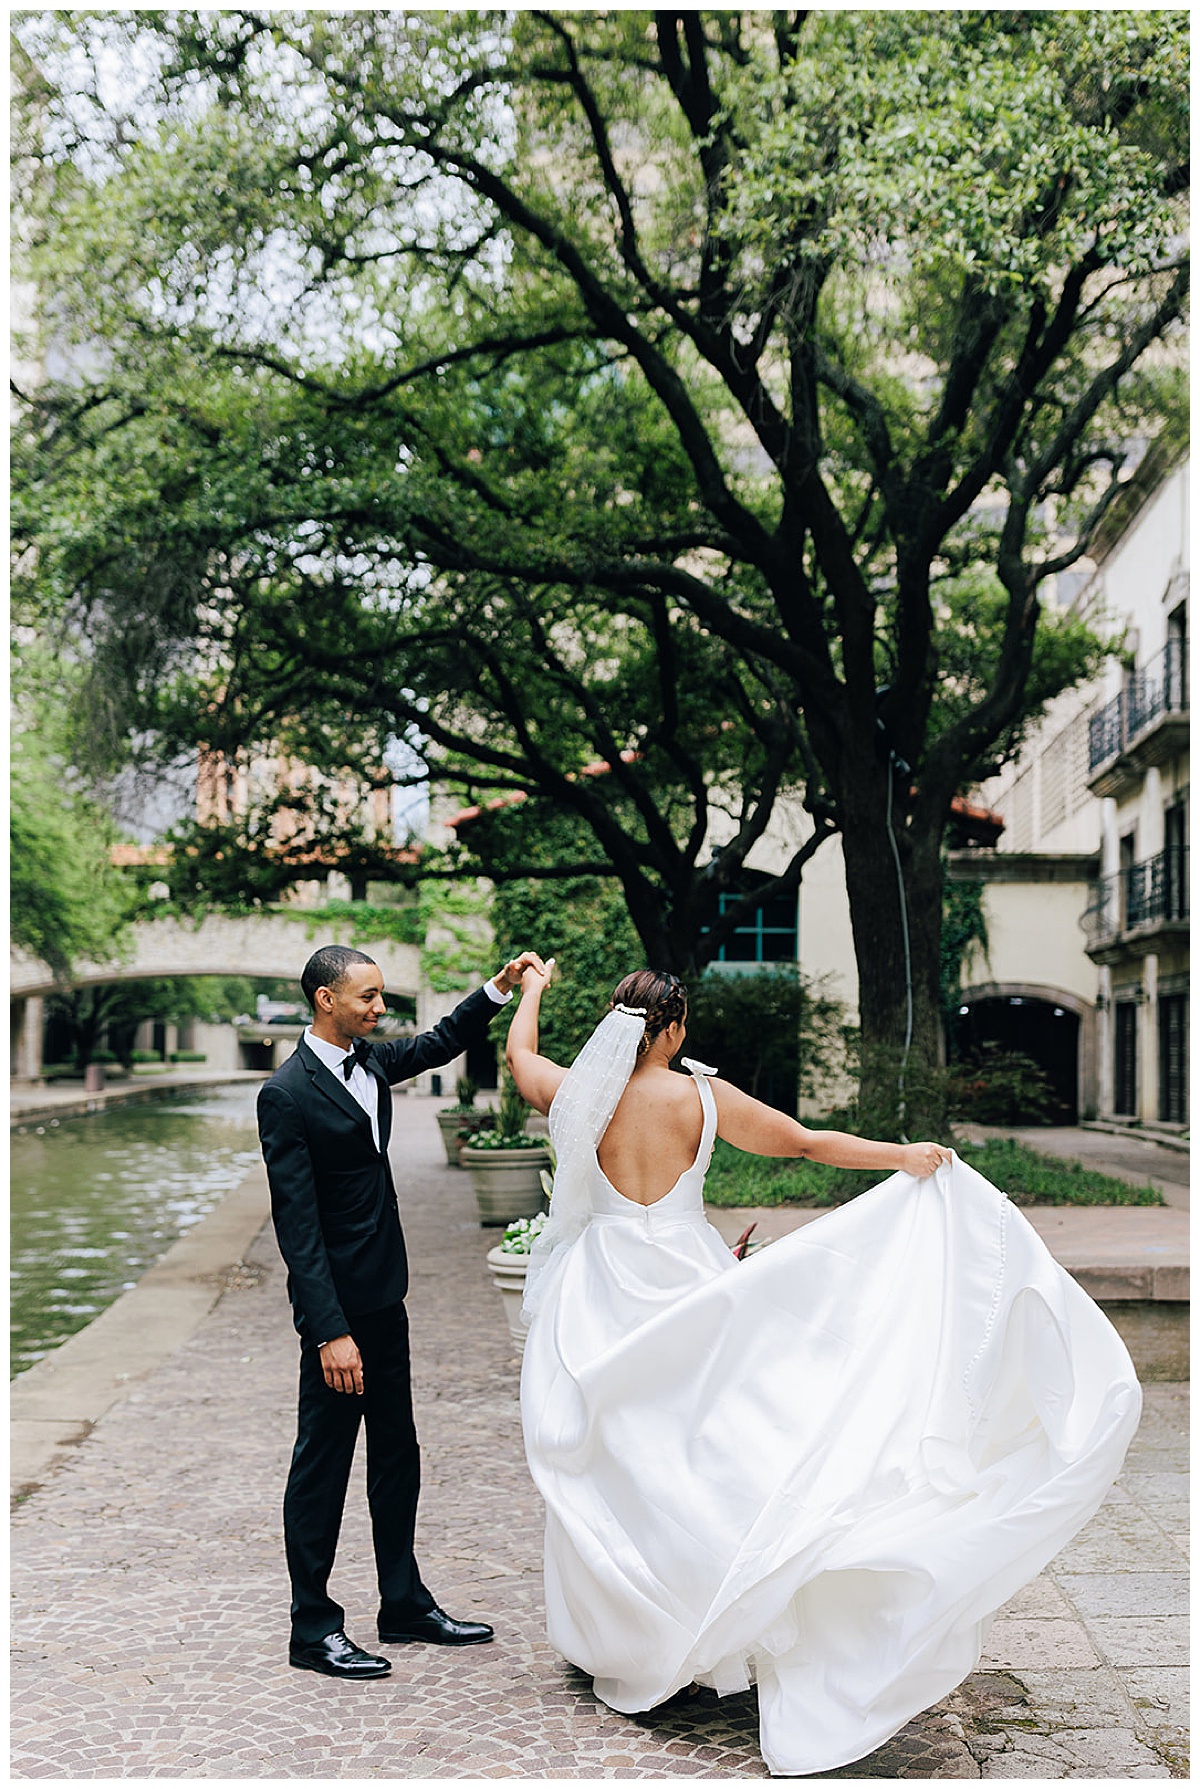 Husband and wife spin, dance, and twirl for Kayla Bouren Photography